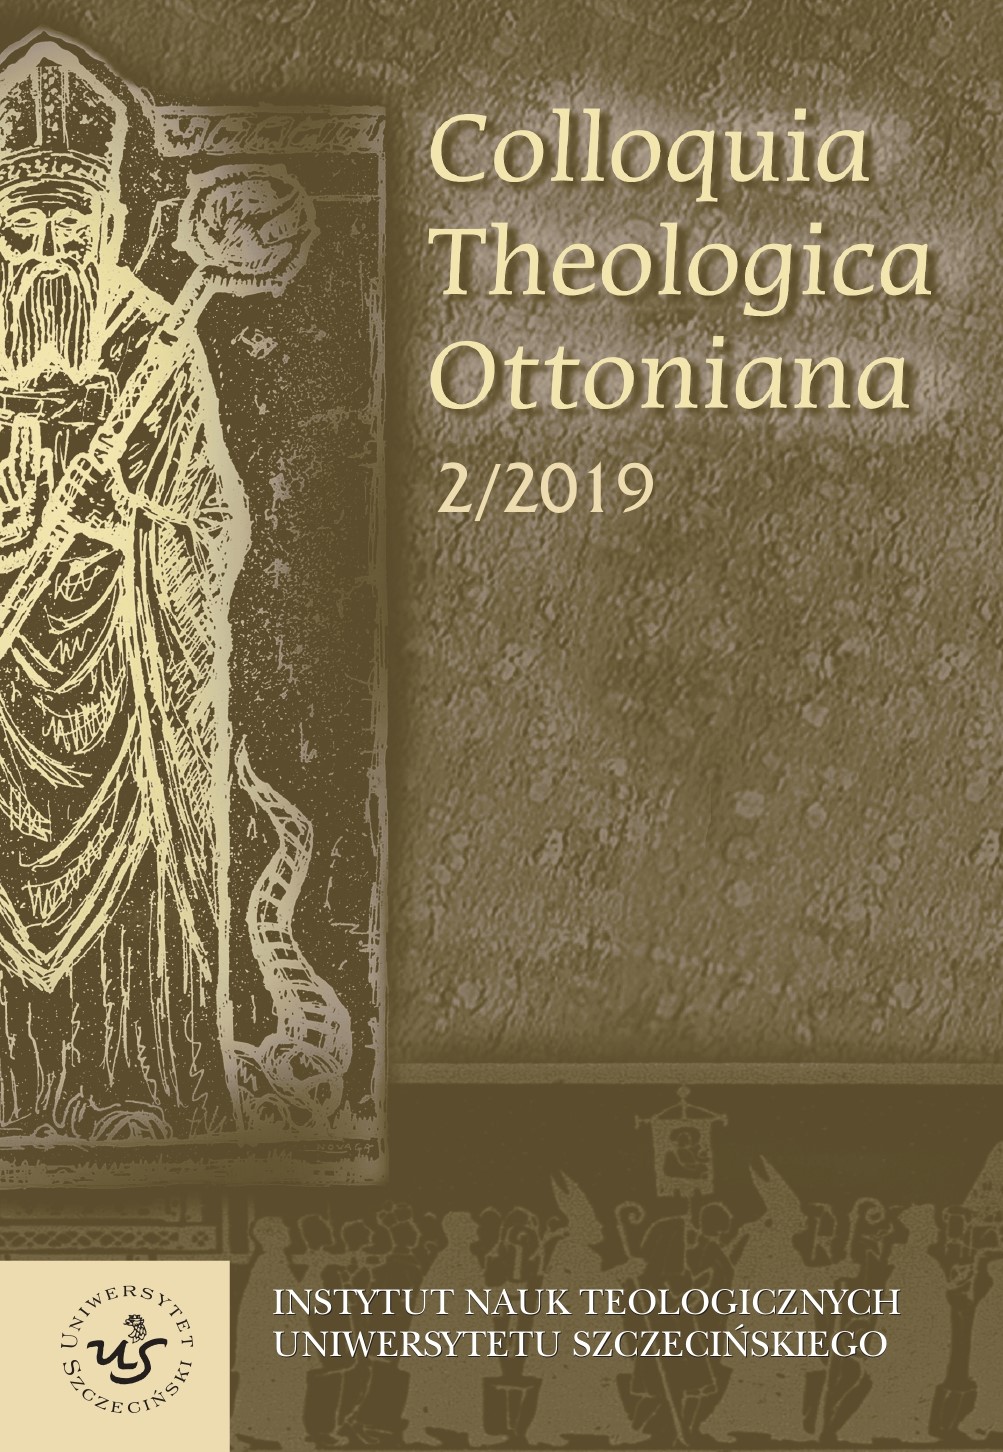 Historiographic aspect of Herodotus, Thucydides and Plutarch in the christology of Acts Cover Image